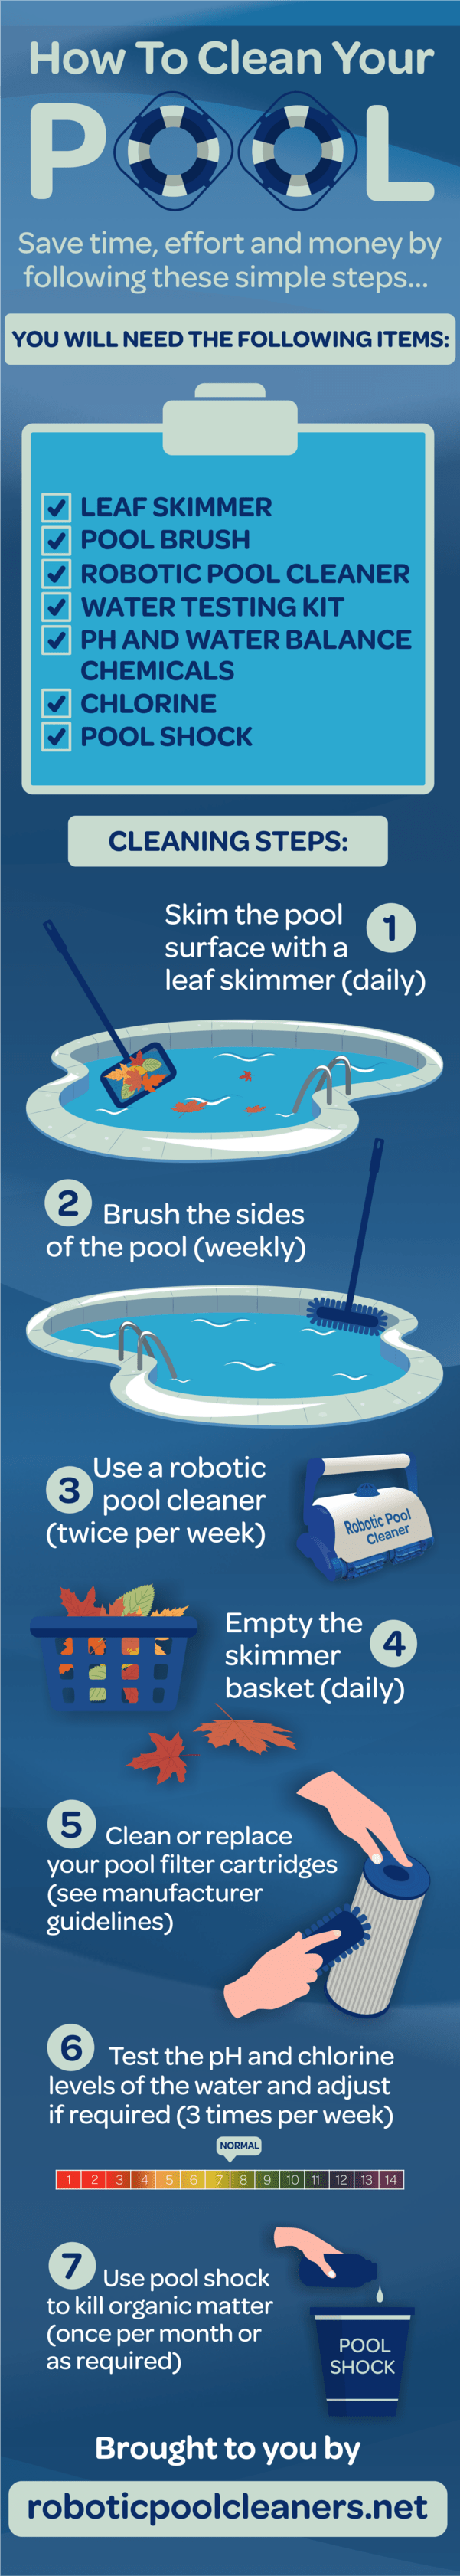 How To Clean Your Pool